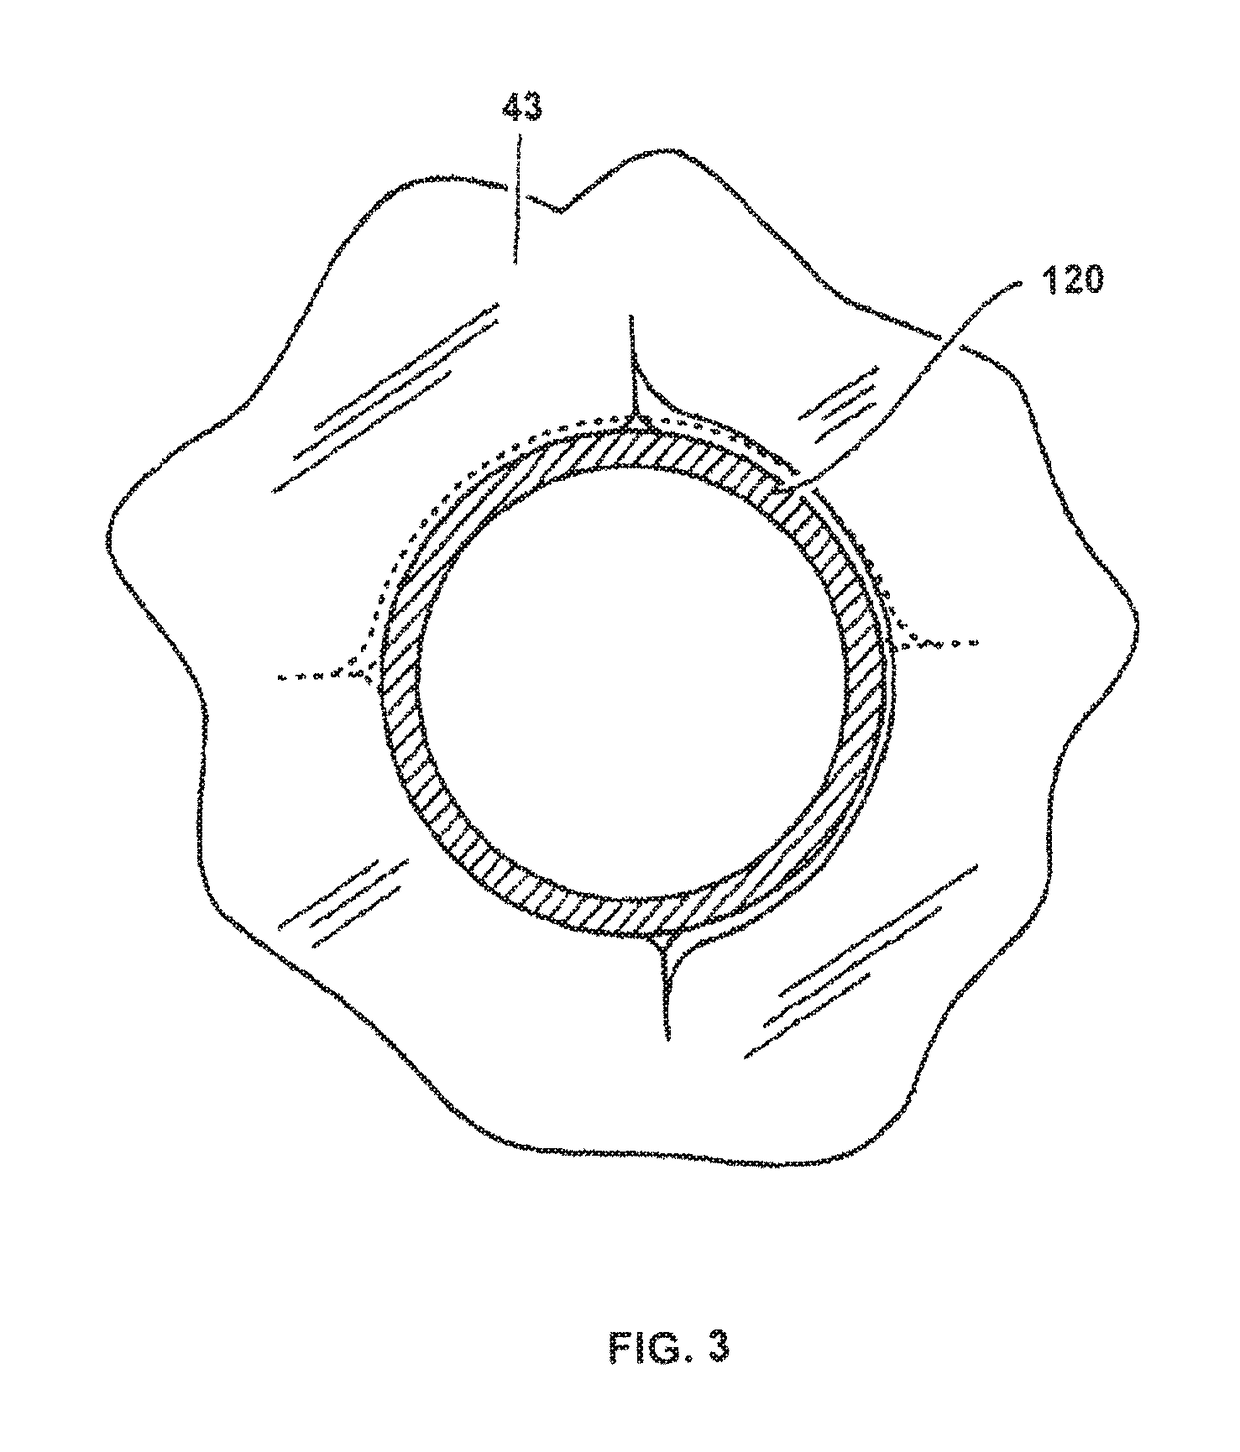 Biocompatible self-lubricating polymer compositions and their use in medical and surgical devices